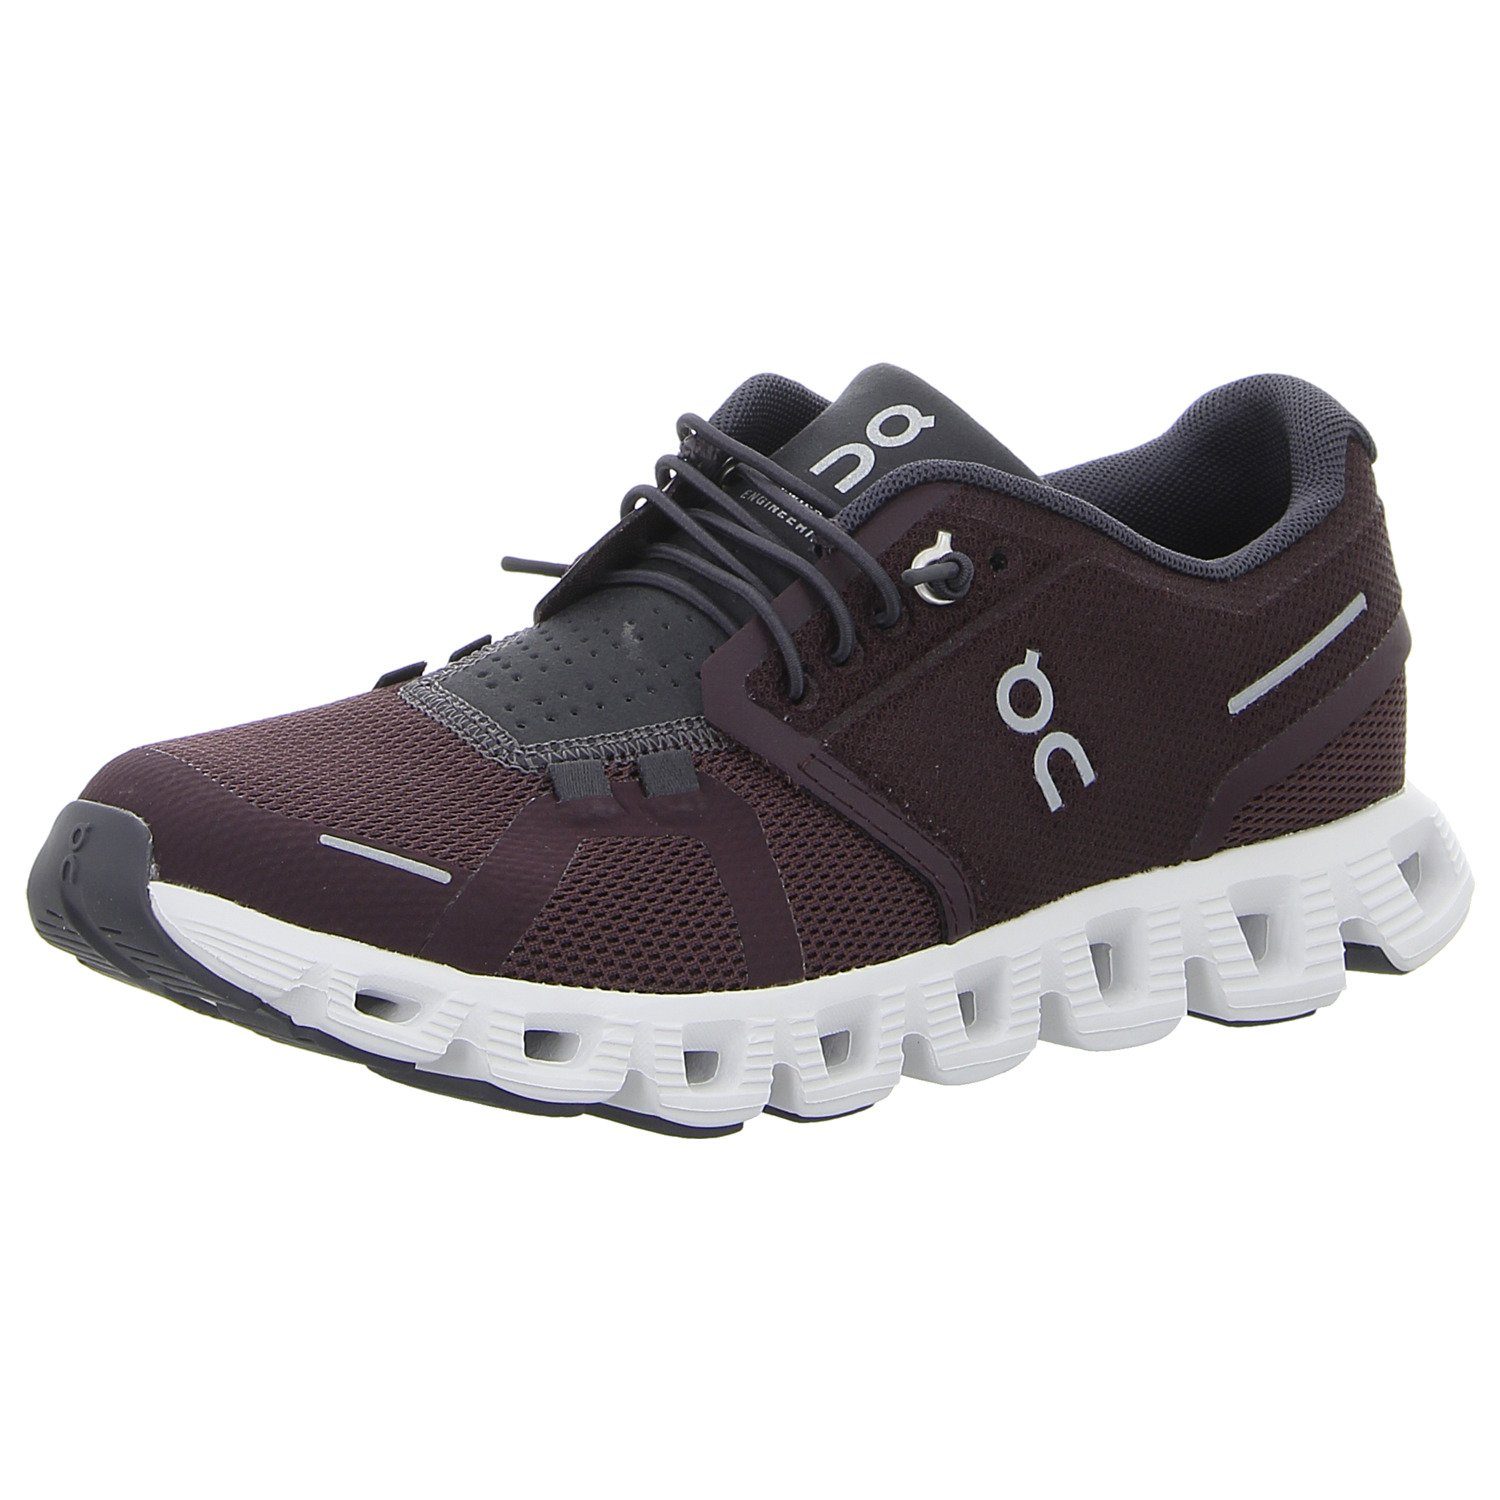 Cloud RUNNING 5 Sneaker mulberry ON eclipse